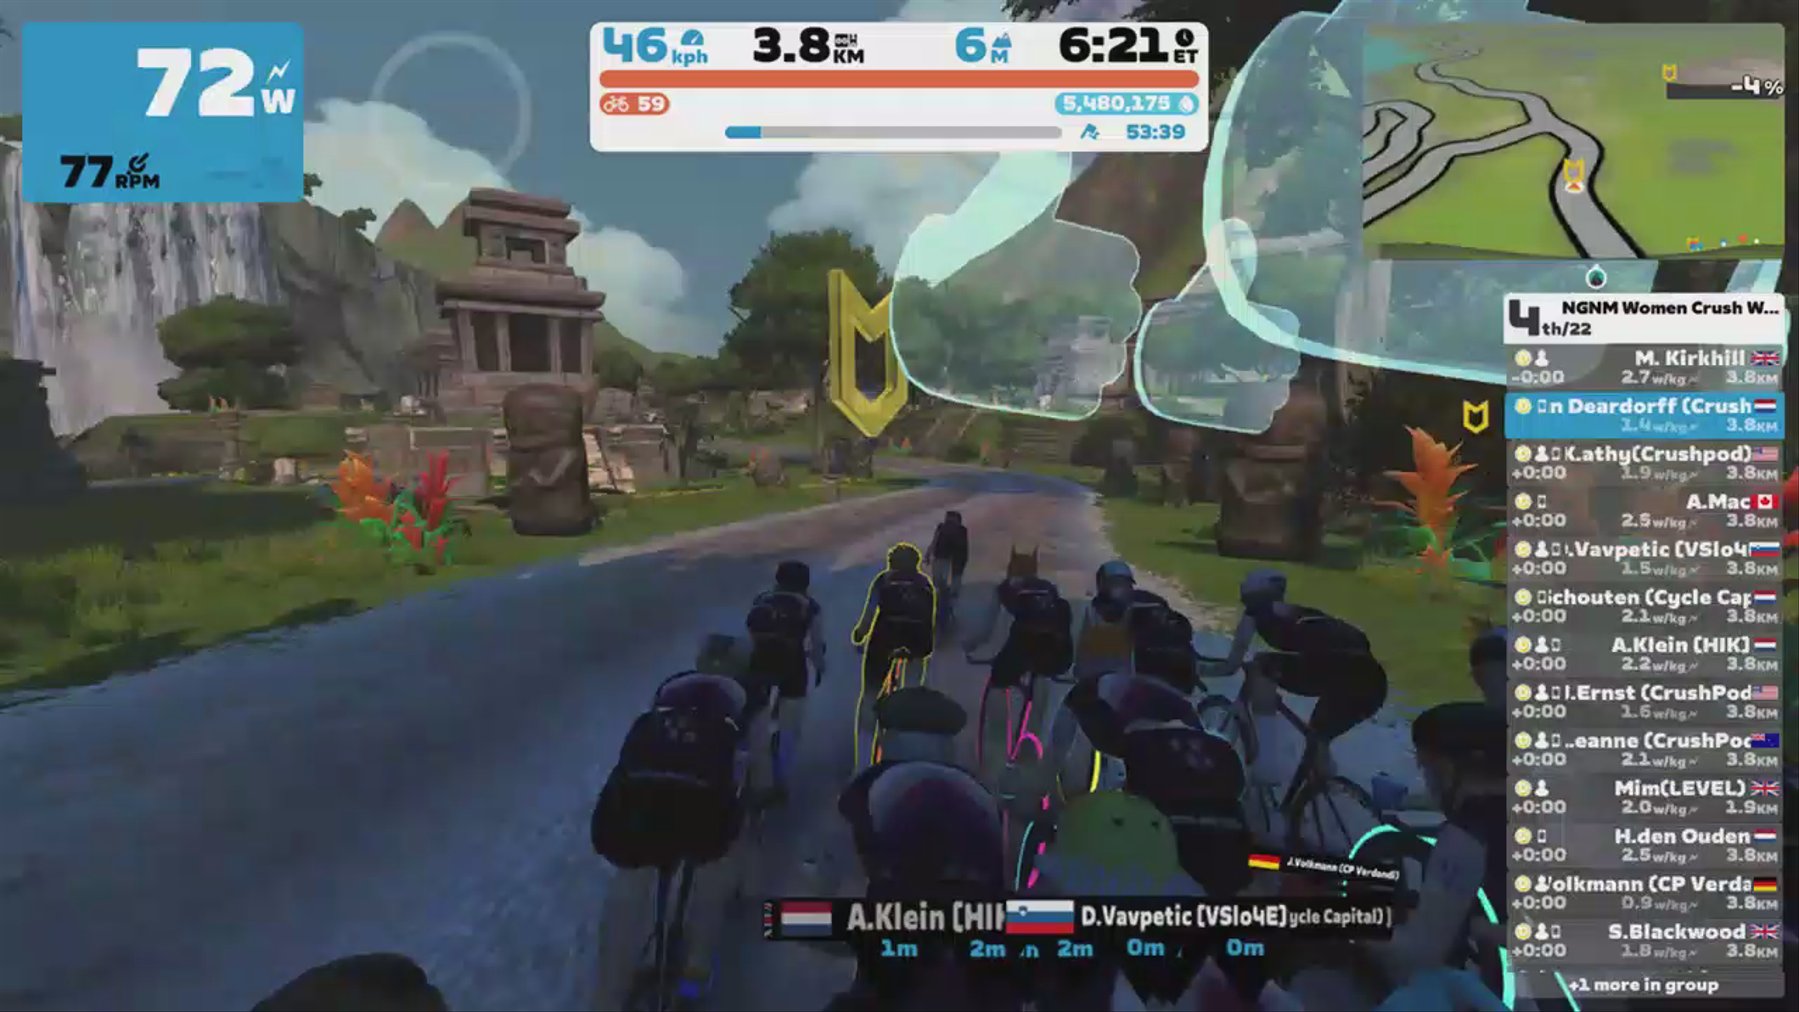 Zwift - Group Ride: NGNM Women Crush Wed - Training Ride (D) on Sugar Cookie in Watopia